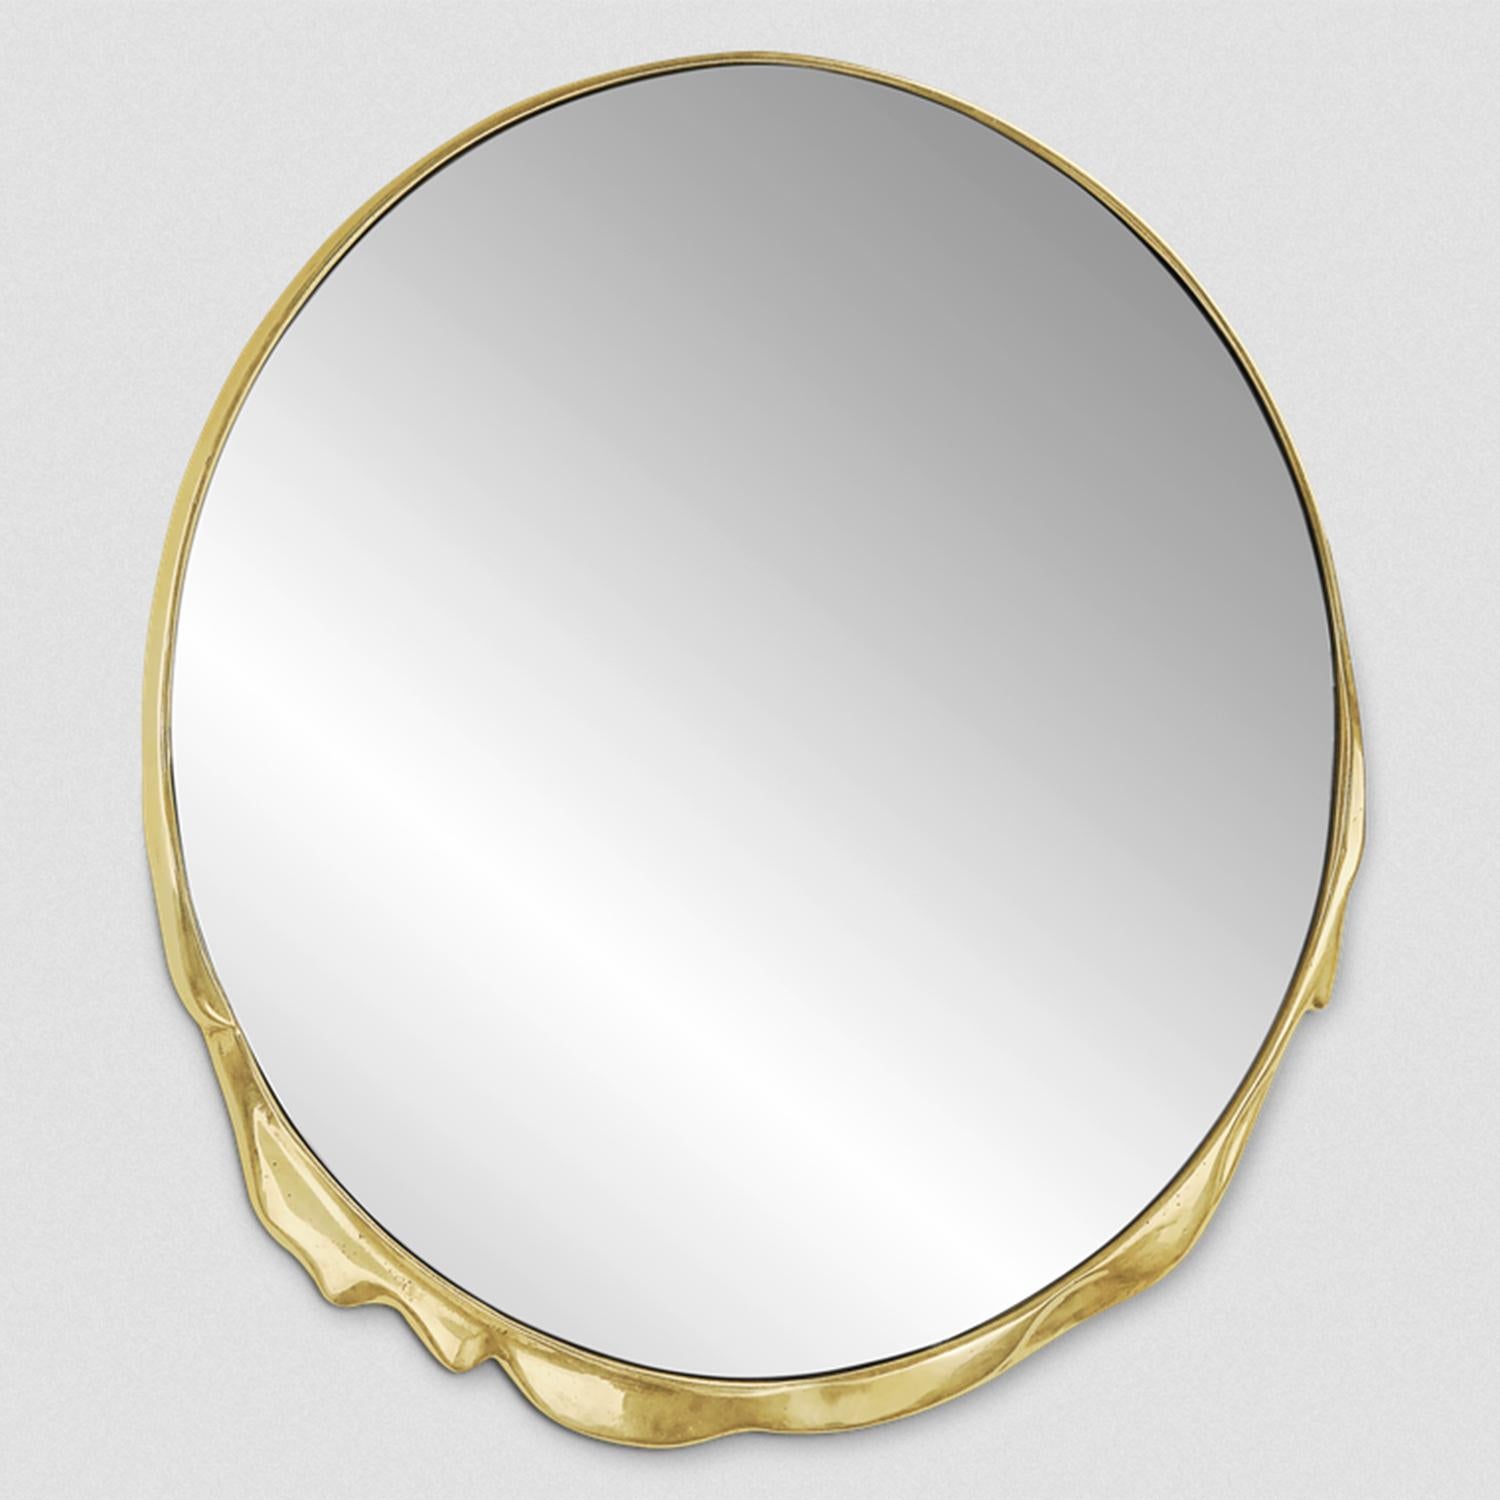 Mirror Melted gold with casted aluminum frame 
in raw gold finish, with clear mirror glass.